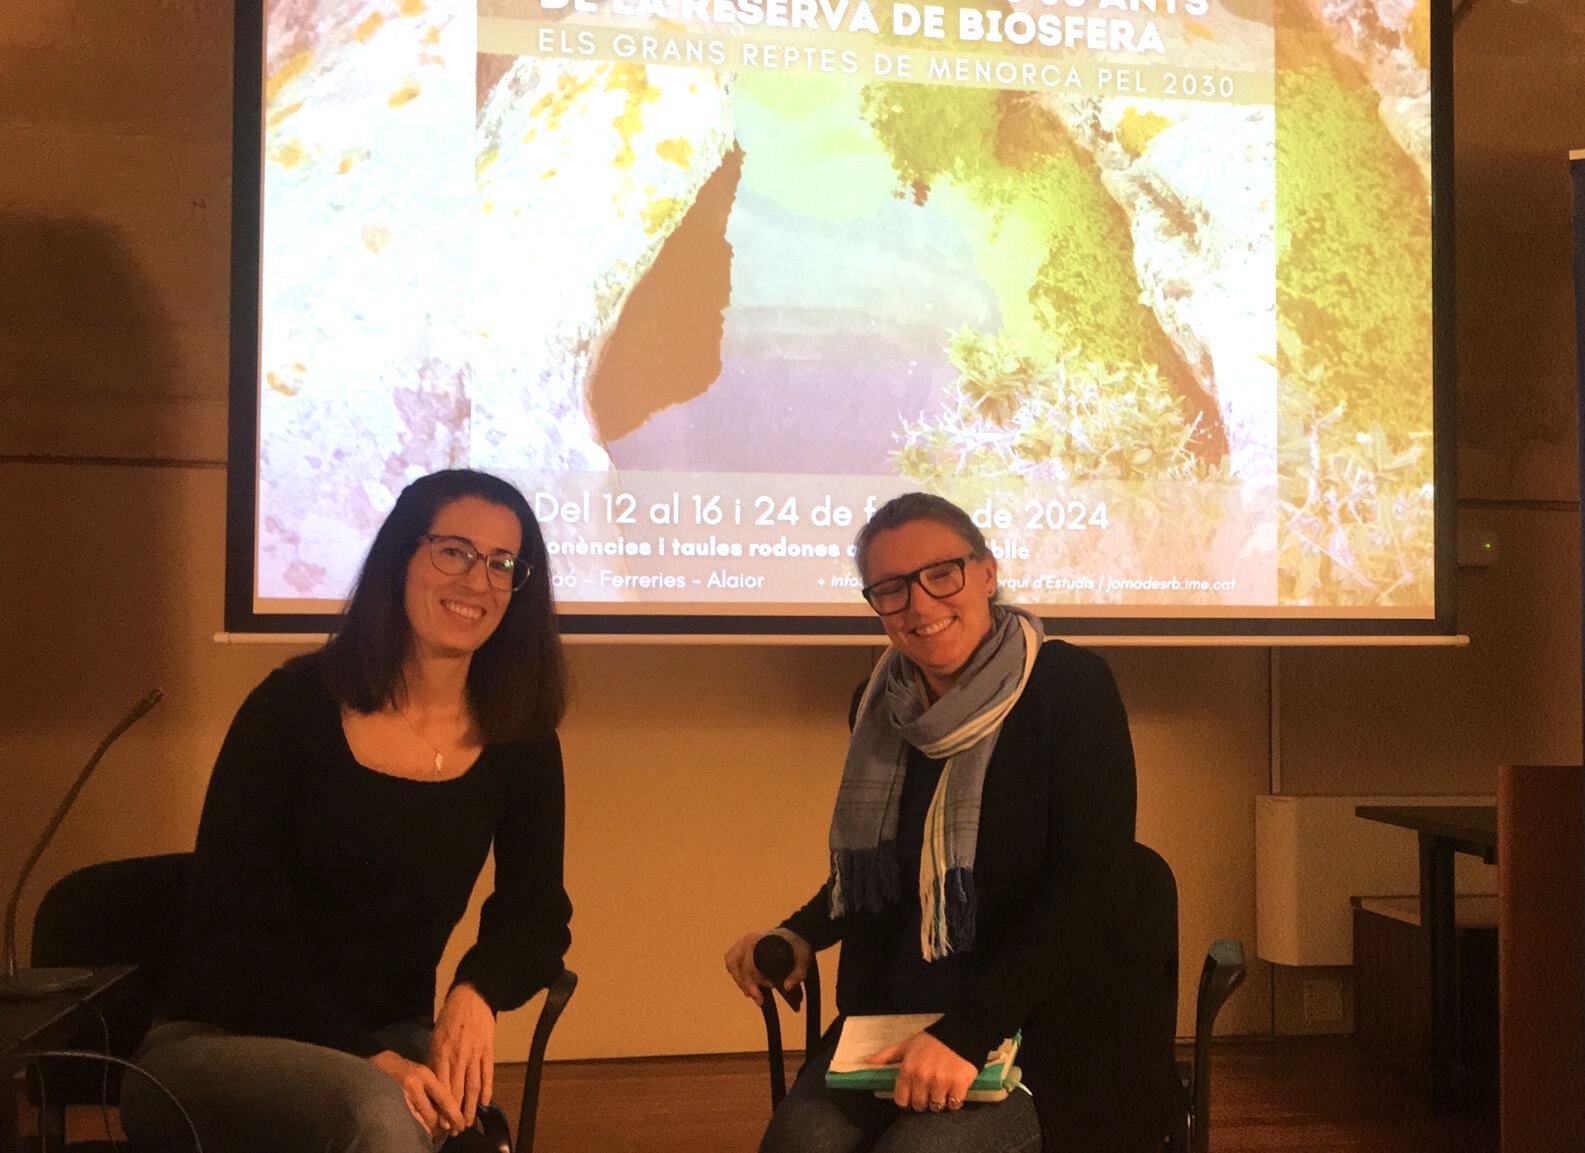 Marilles participated in seminars marking 30 years of the Menorca Biosphere Reserve